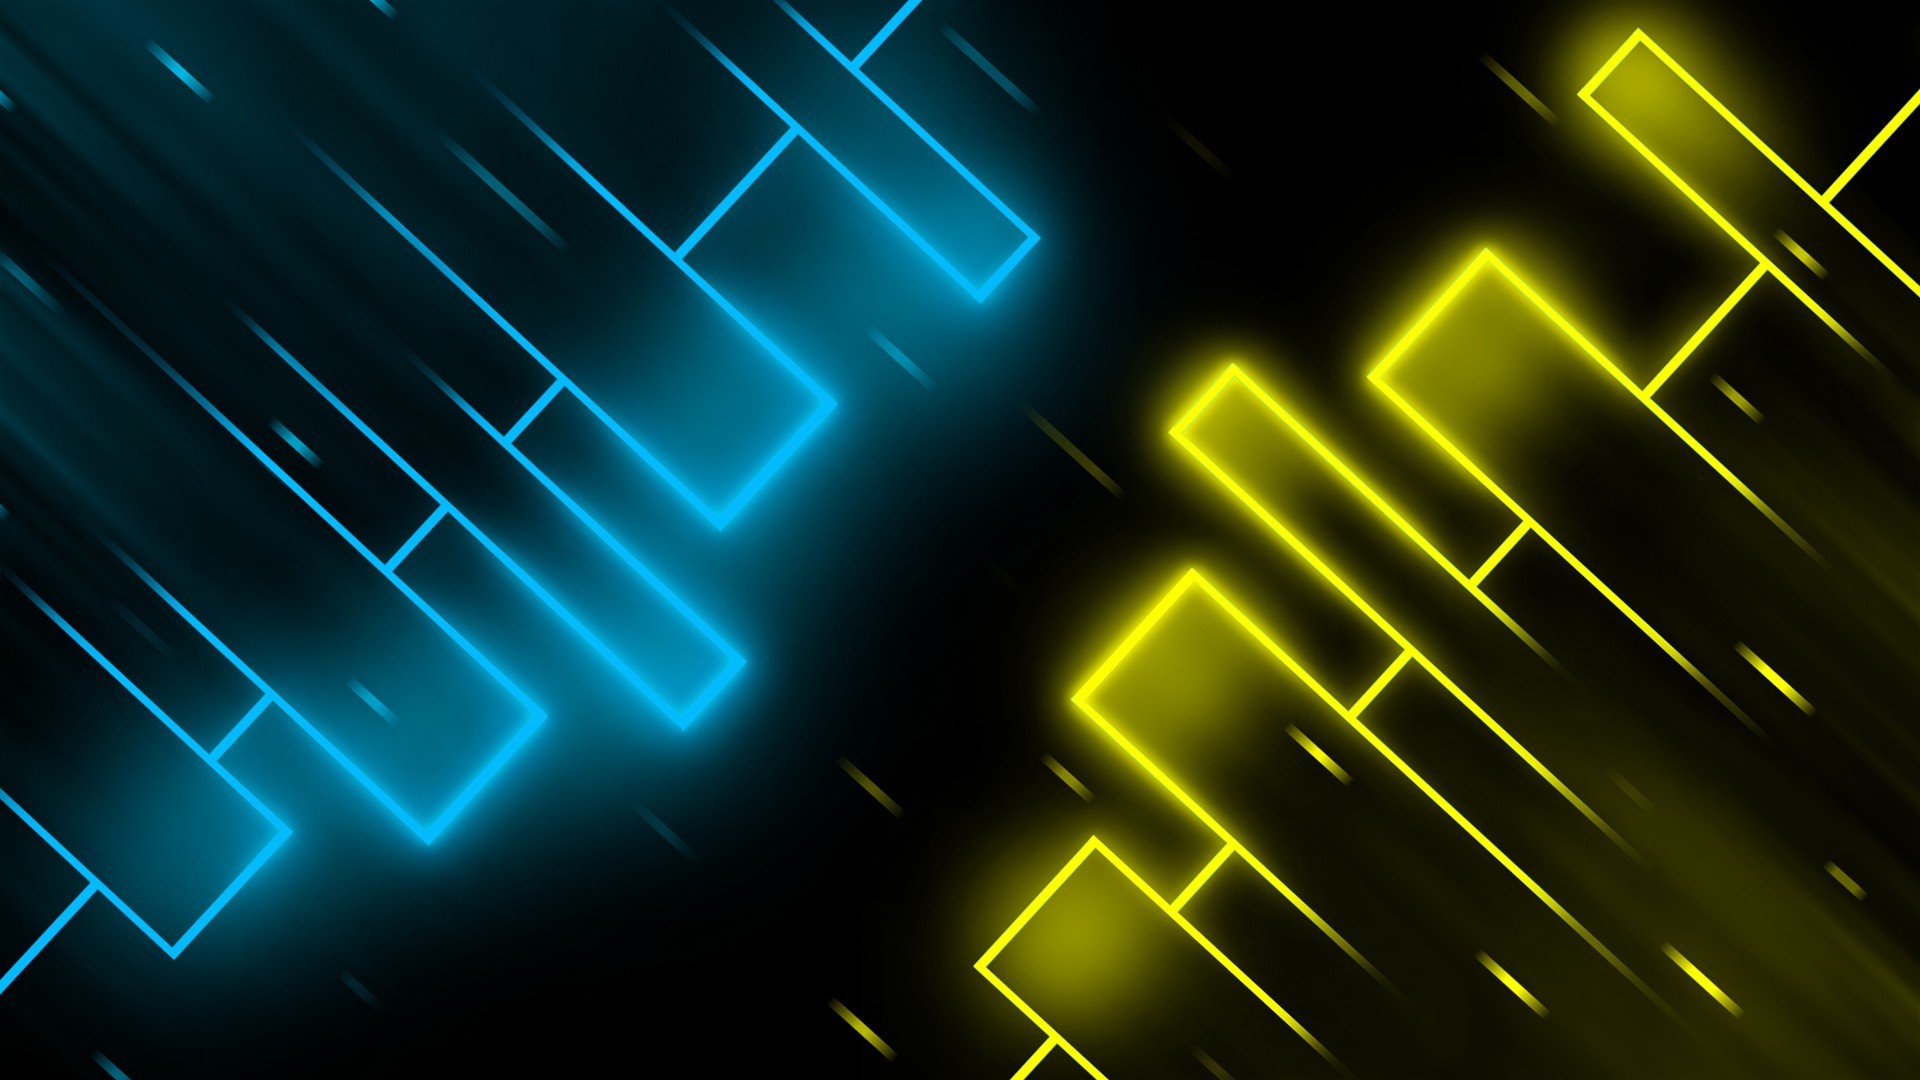 1920x1080 Blue and Yellow Abstract Pattern Images